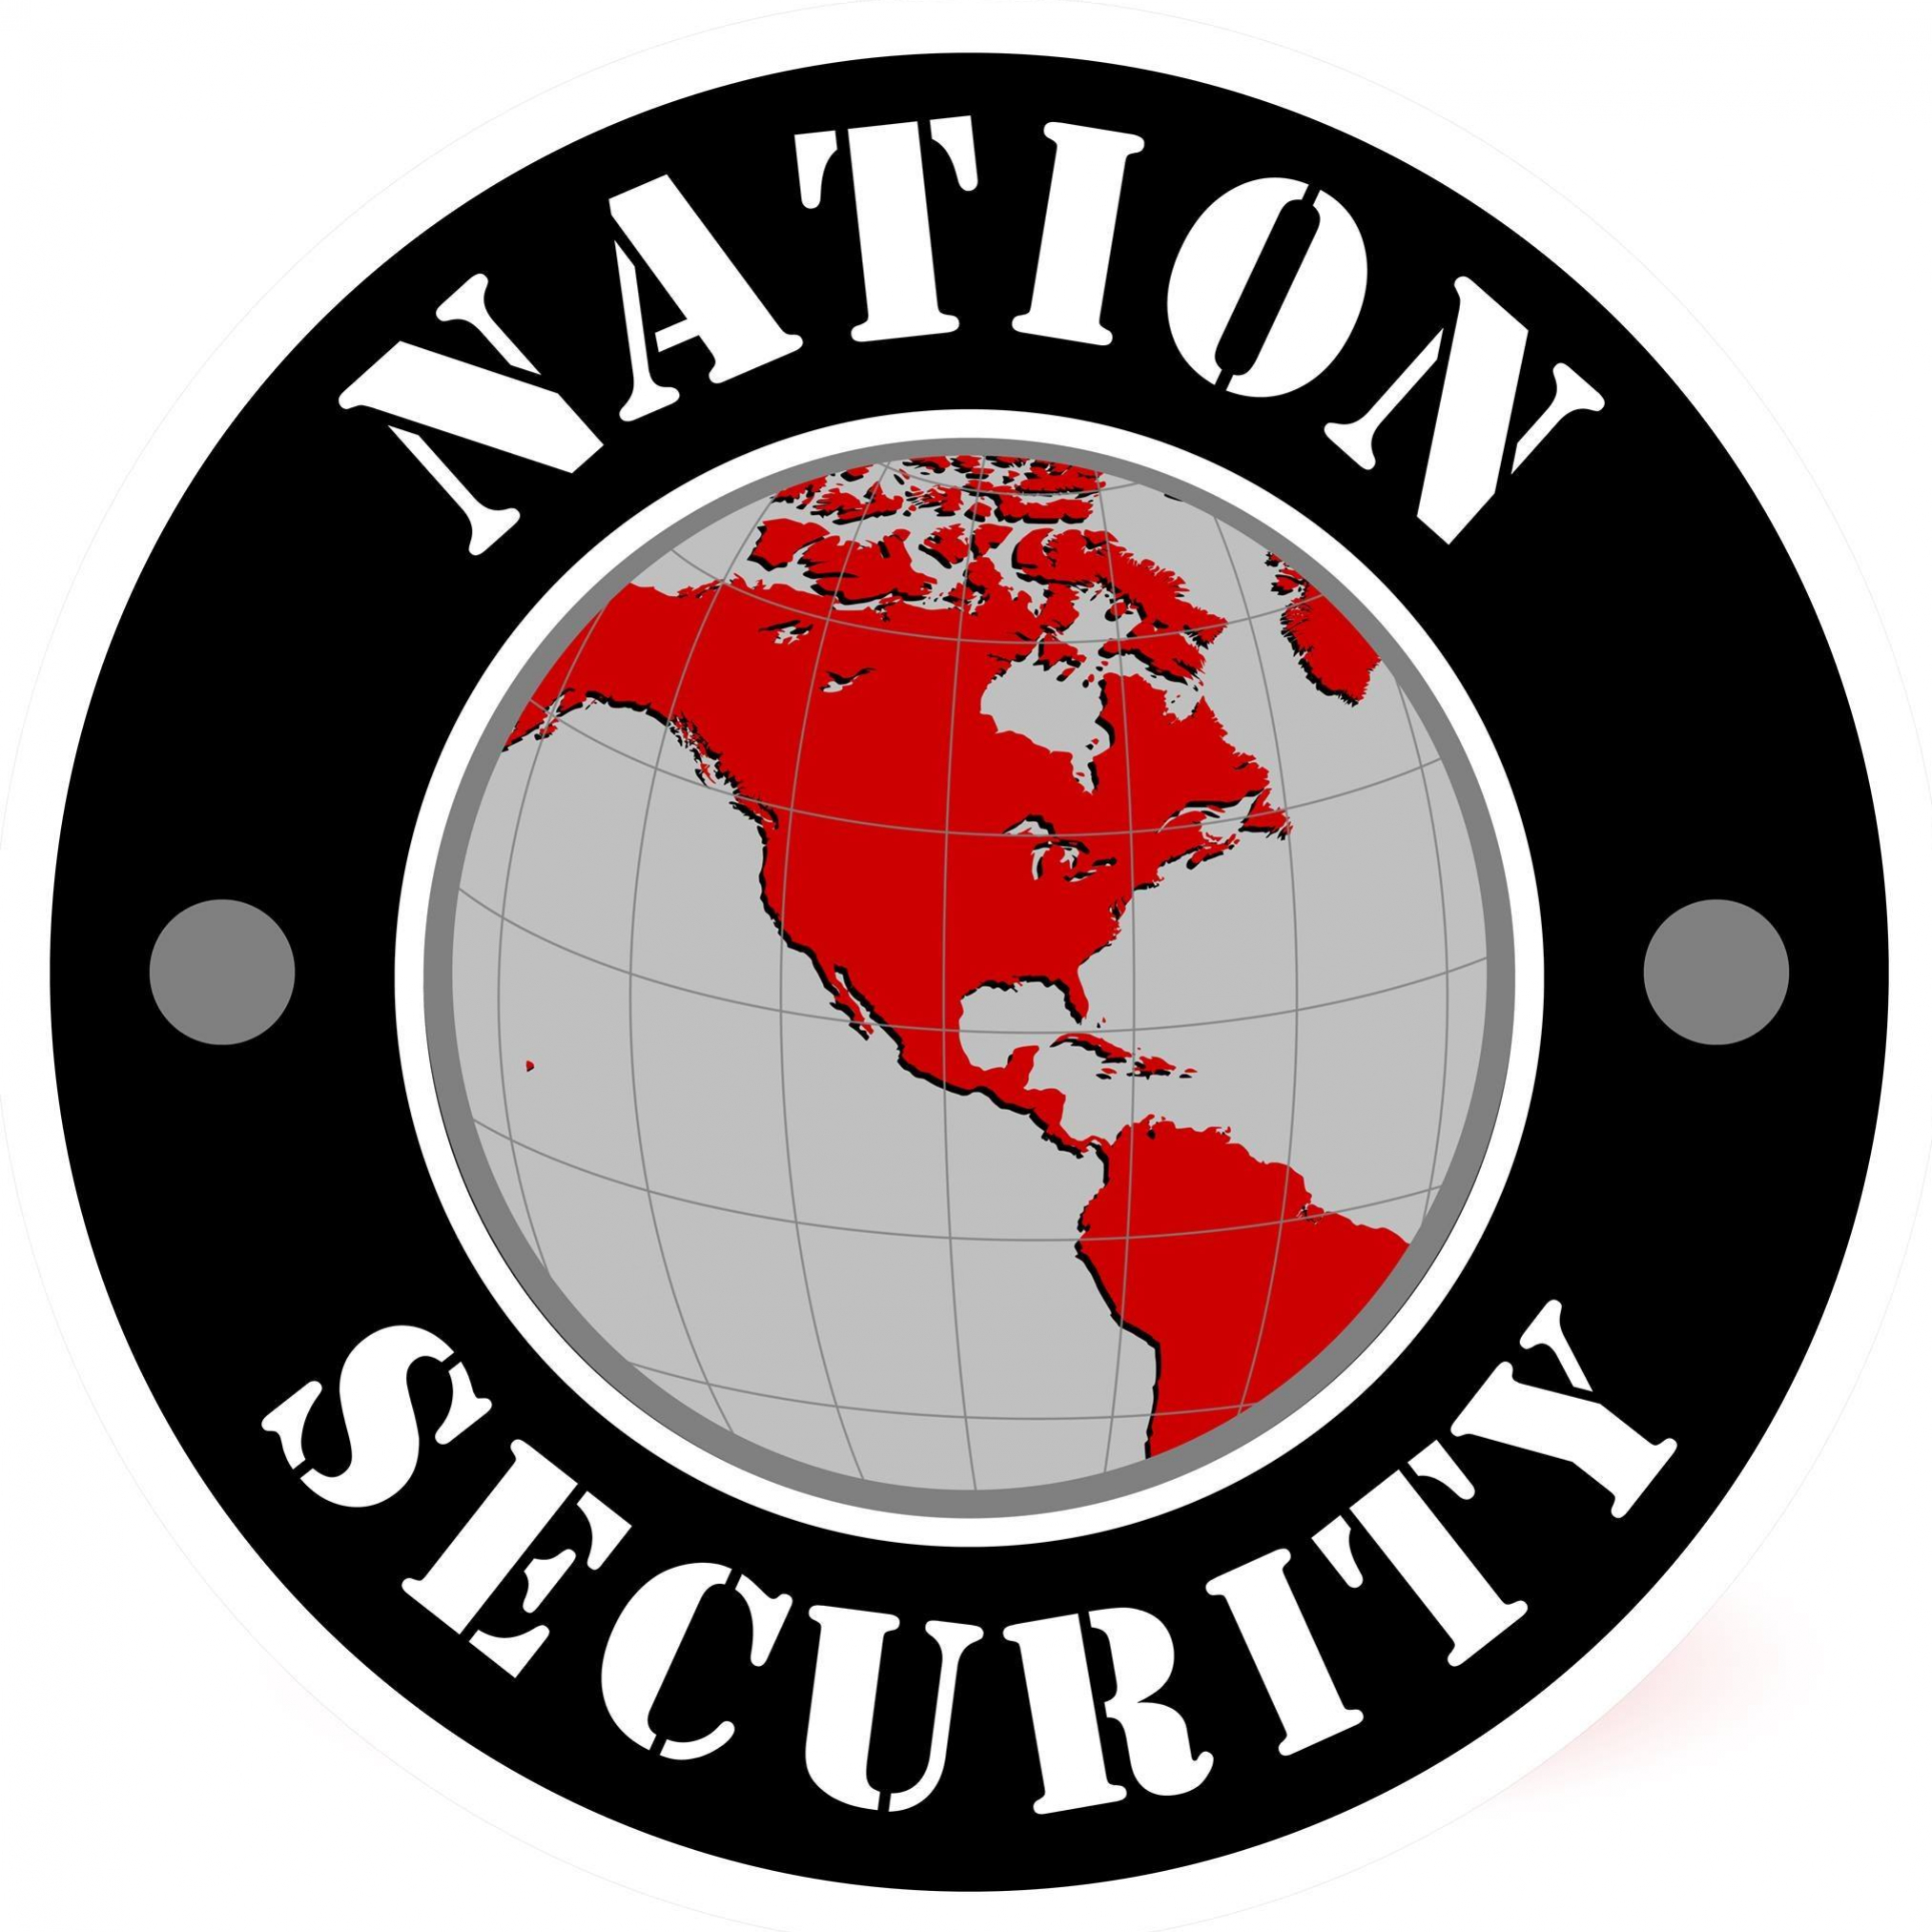 NationSecurity